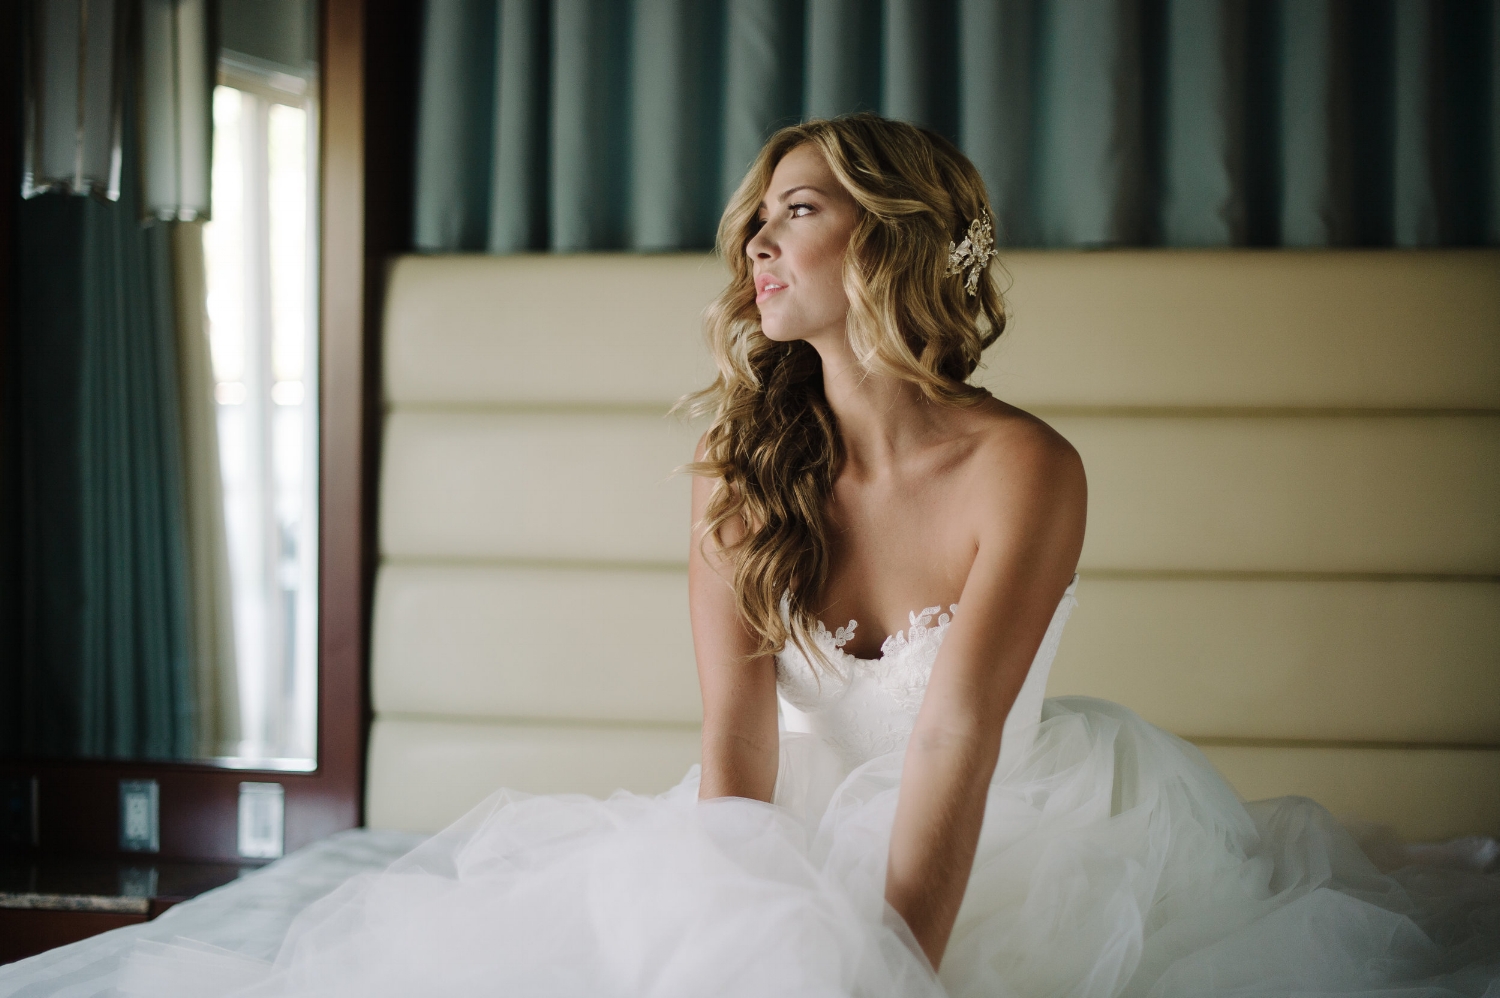 Wedding Photos with Blonde Long Hair Down. Bridal Hairstyles and Makeup by Vanity Belle in Orange County (Costa Mesa) and San Diego (La Jolla)